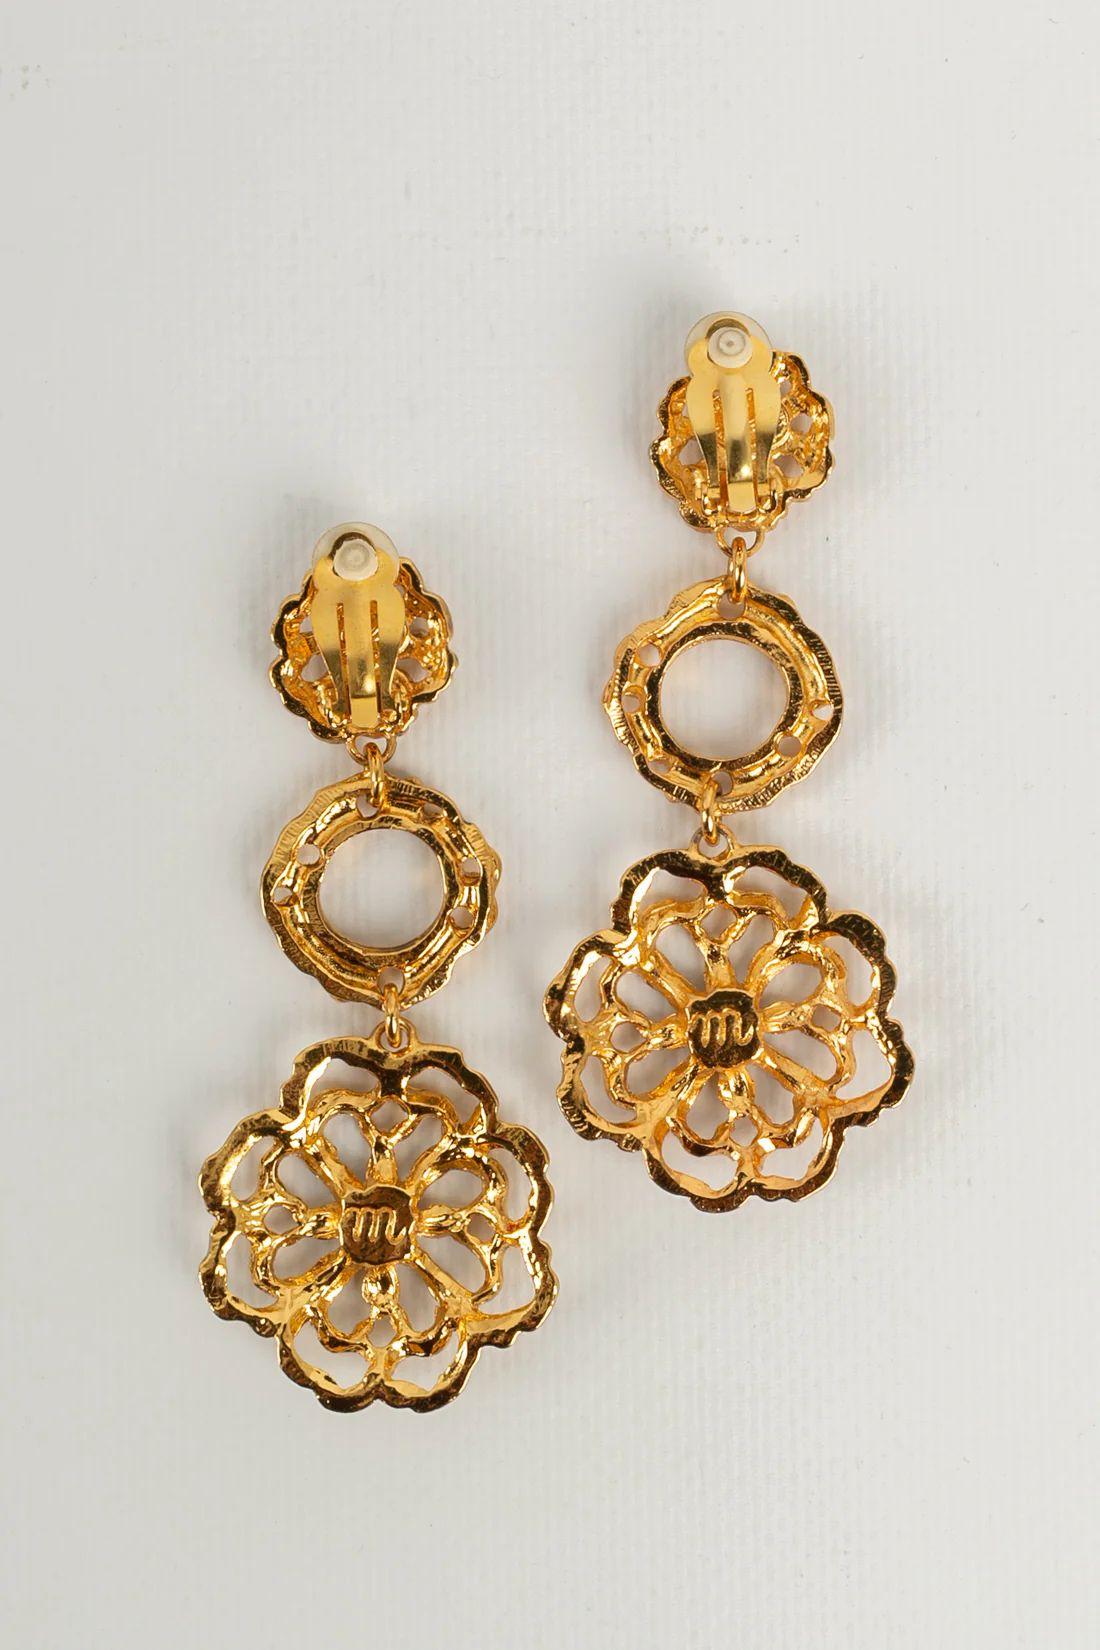 Christian Lacroix - (Made in France) Gold metal clip earrings from 1980's

Additional information:
Dimensions: 9 cm

Condition: 
Very good condition

Seller Ref number: BO26